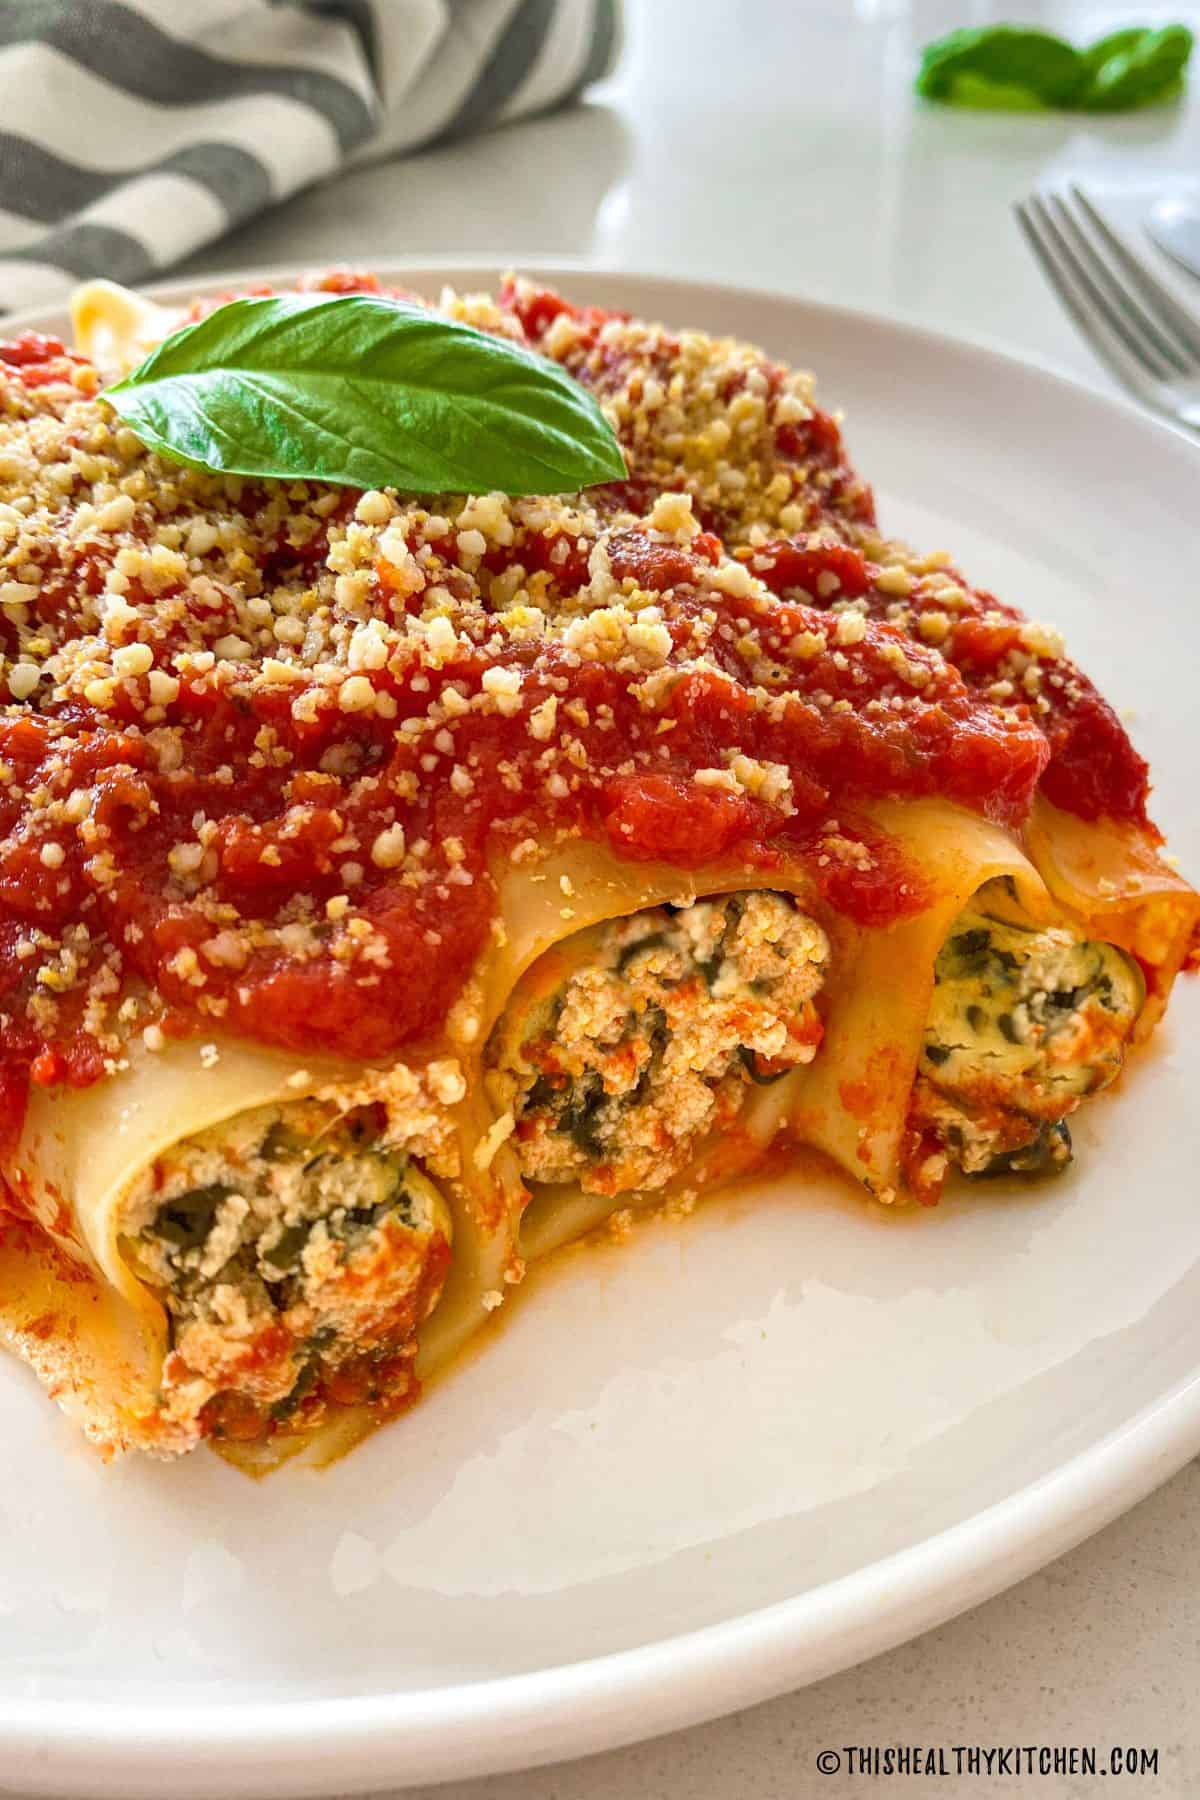 Side view of stuffed vegan cannelloni with ricotta and spinach filling.